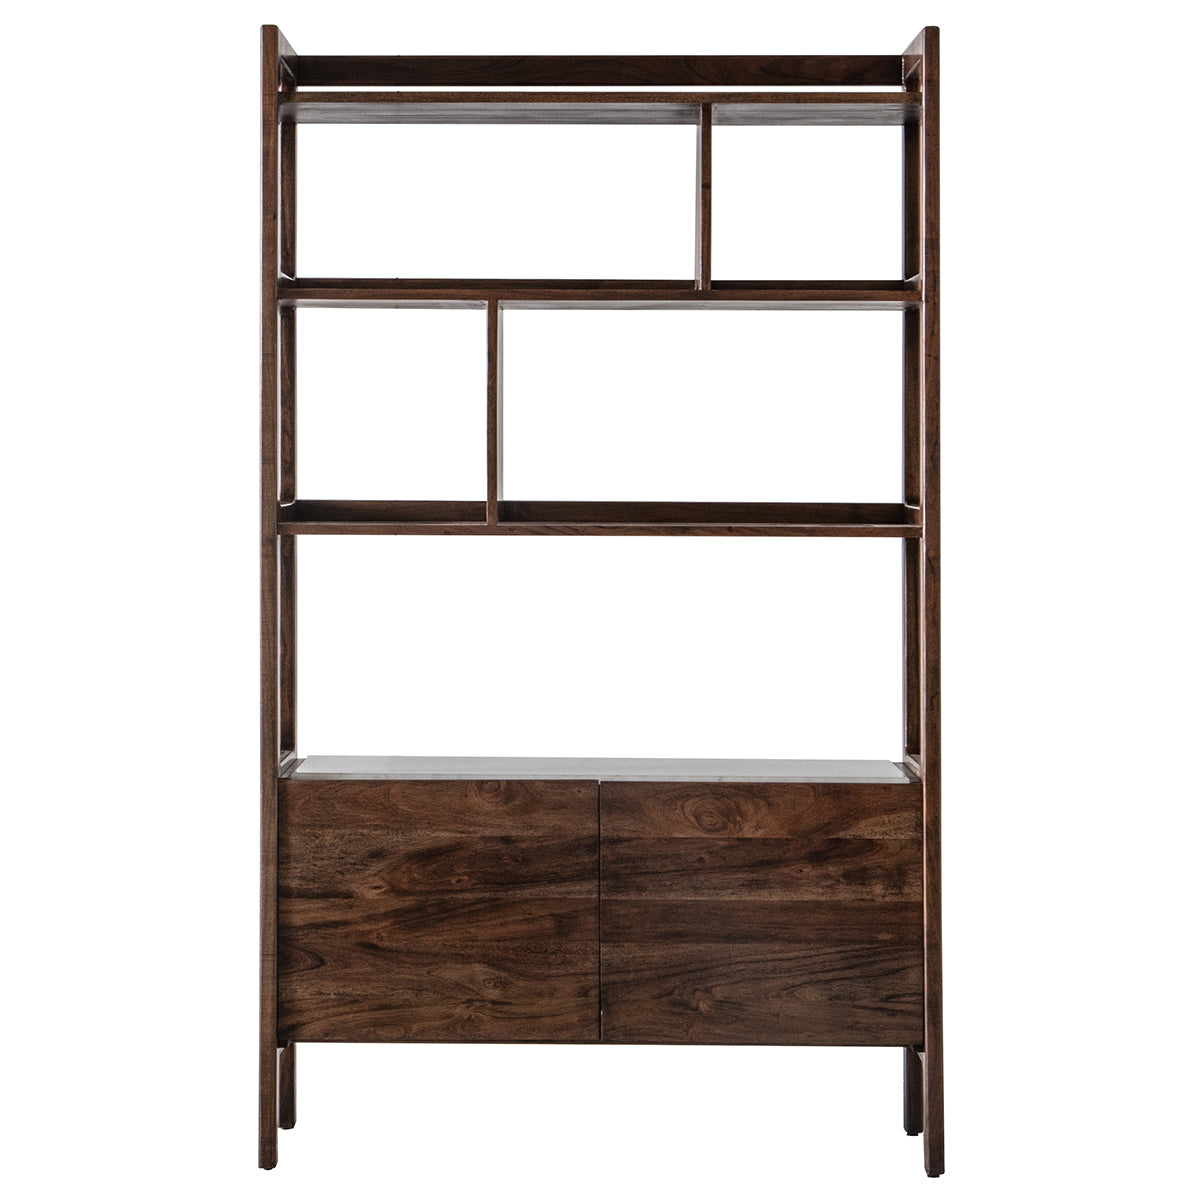 Load image into Gallery viewer, A Kikiathome.co.uk furniture piece, the Avonwick Display Unit features shelves and drawers, perfect for interior decor.
